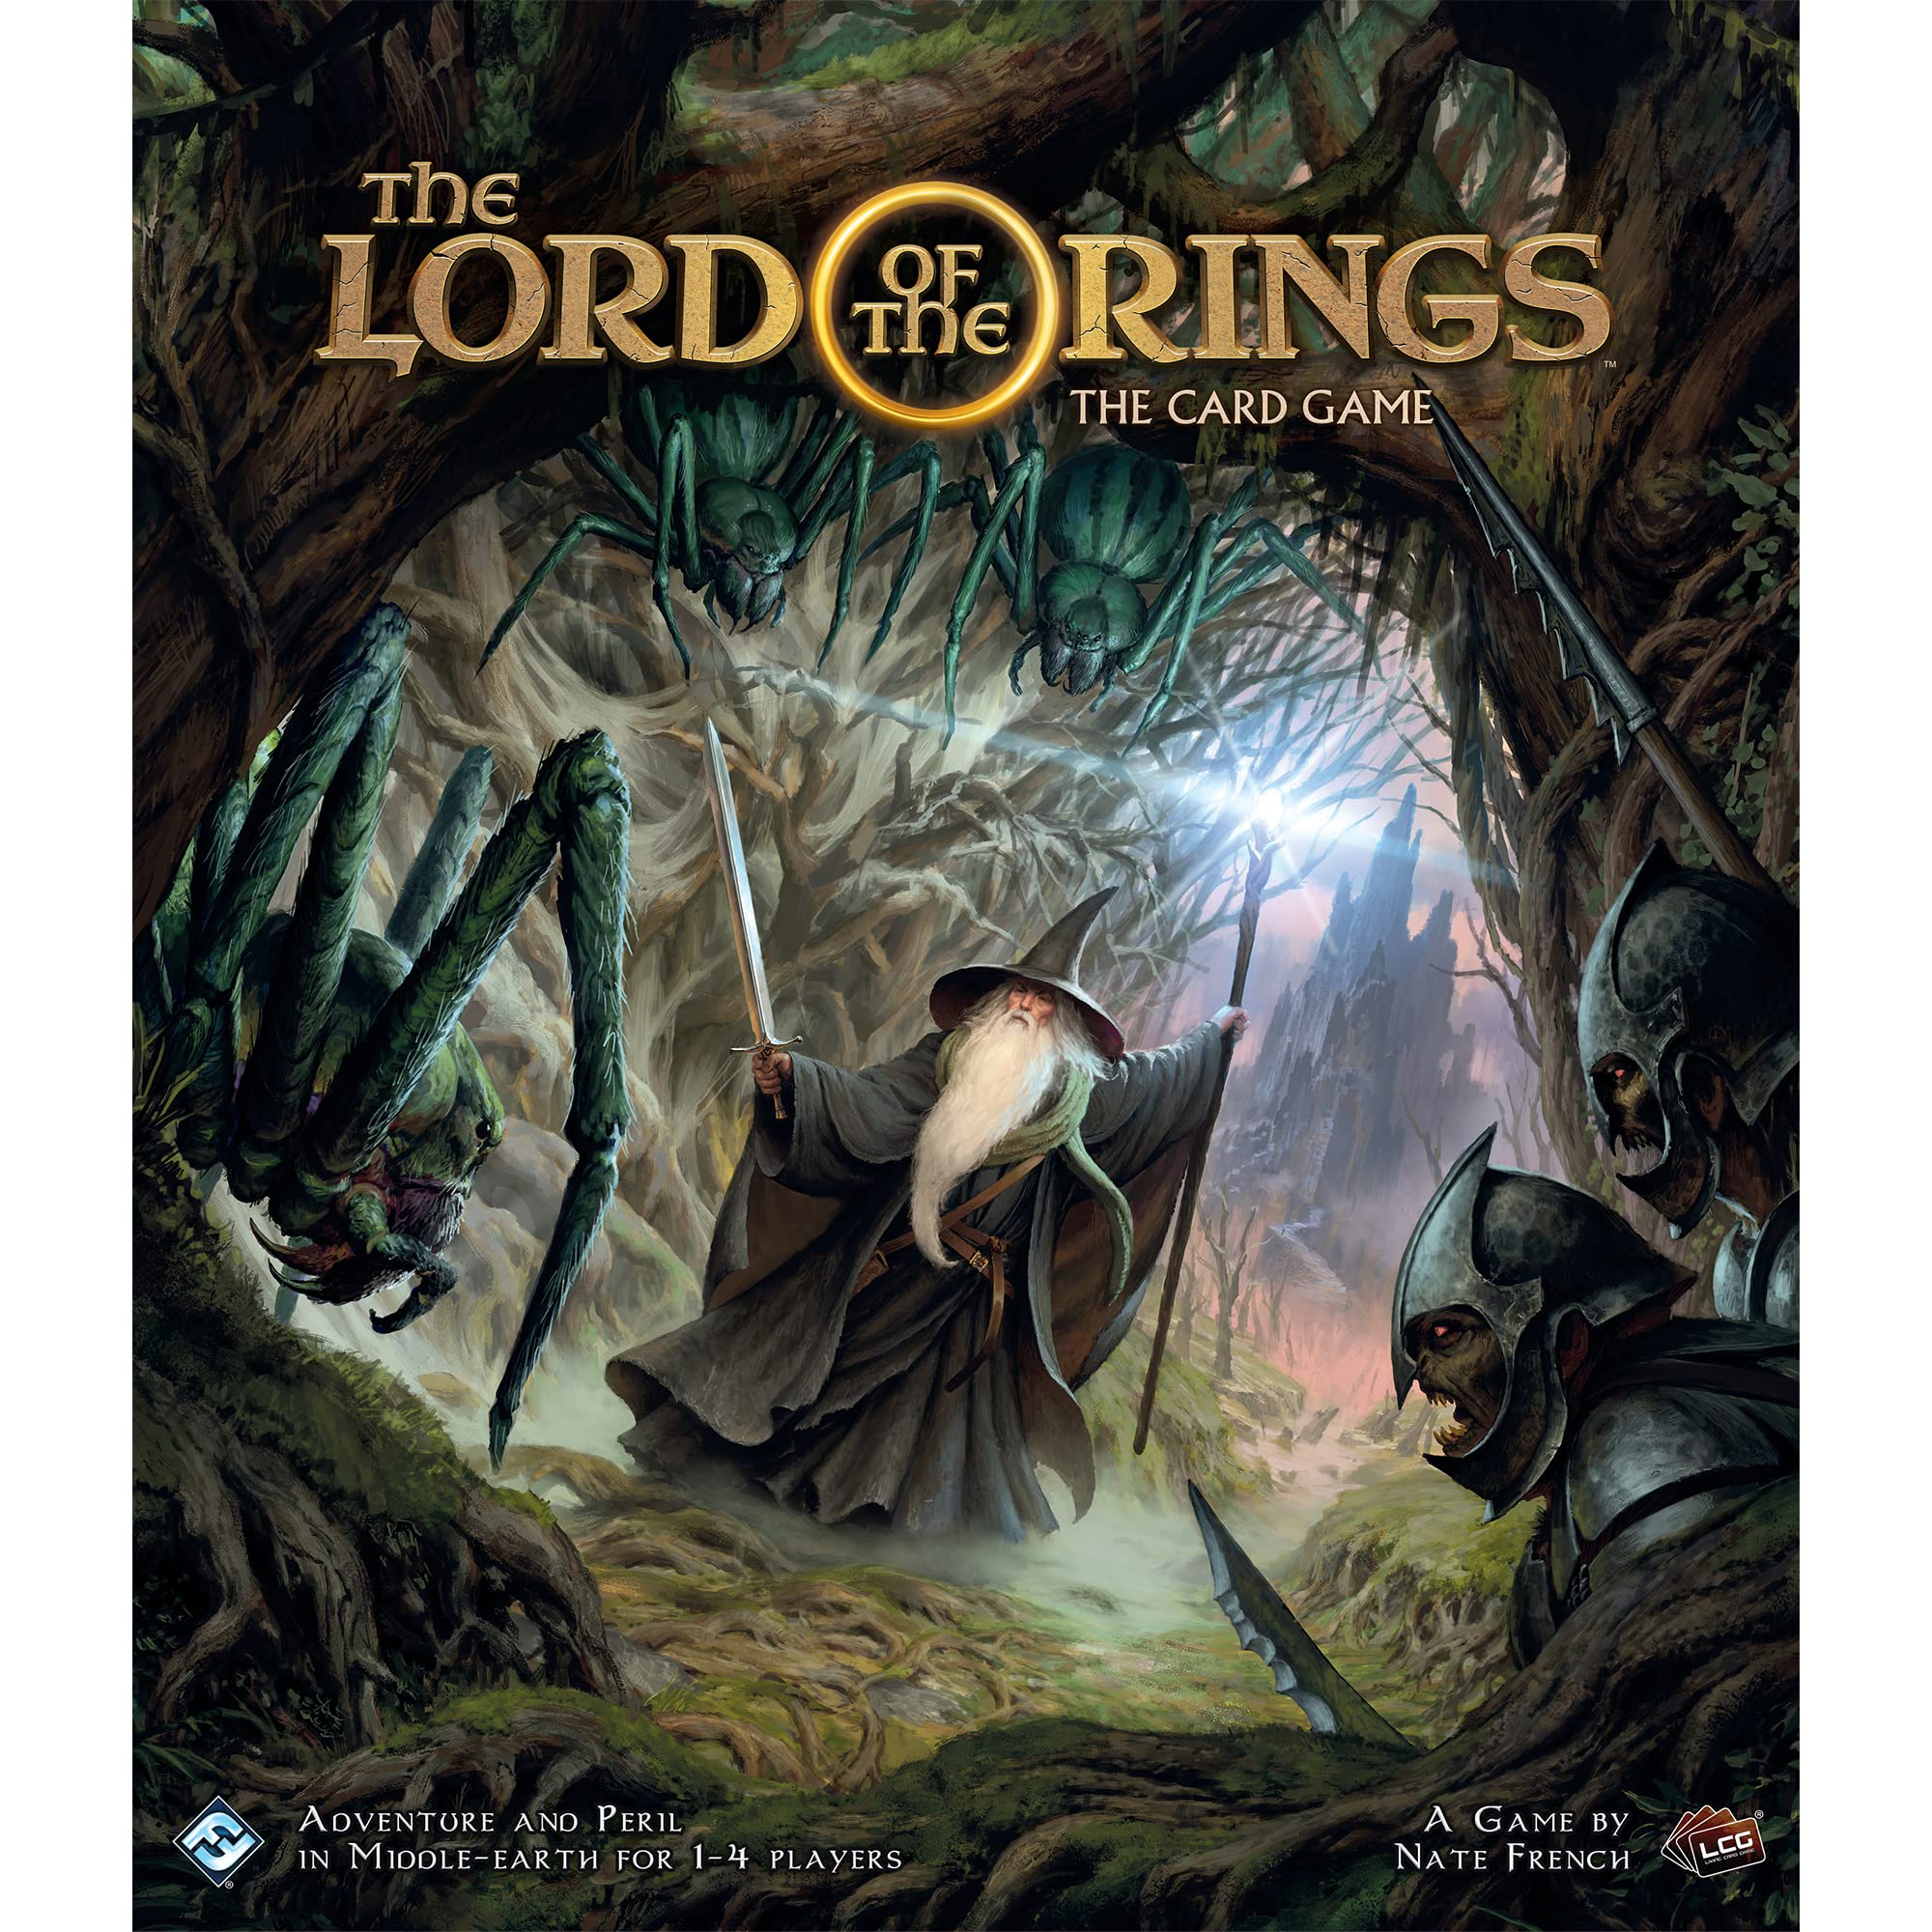 The Lord of the Rings: The Card Game Revised Core Set | Adventure/Cooperative Game for Adults and Teens | Ages 14+ | 1-4 Players | Average Playtime 30-120 Minutes | Made by Fantasy Flight Games